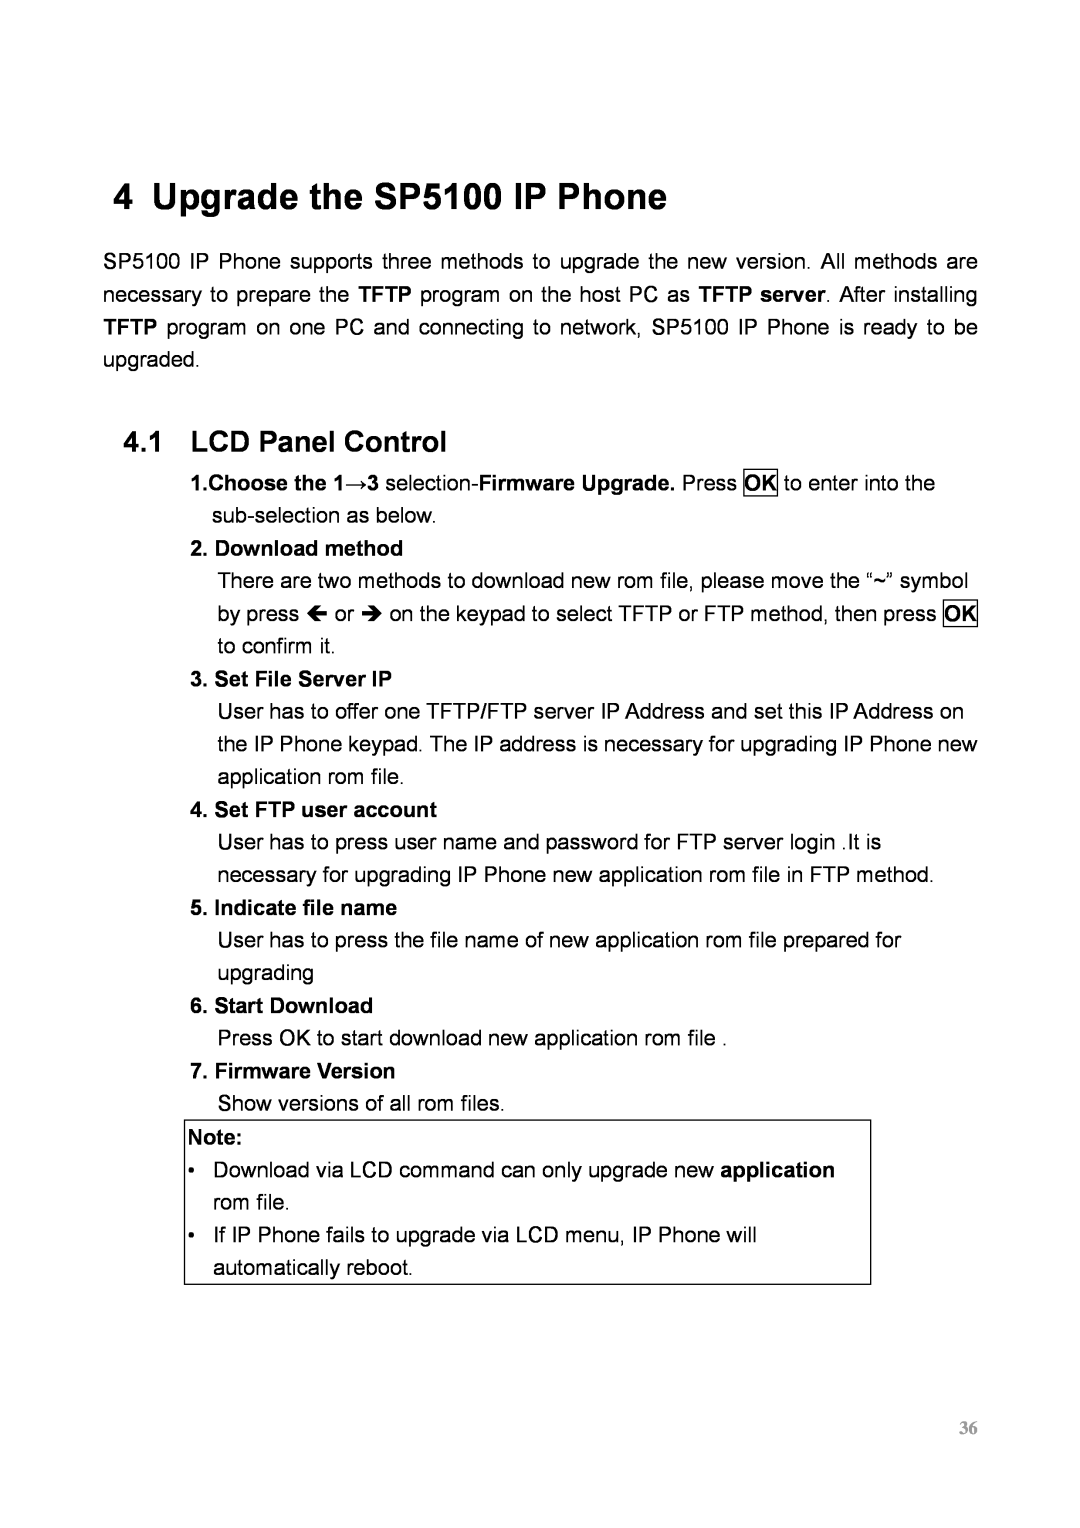 MicroNet Technology user manual Upgrade the SP5100 IP Phone, LCD Panel Control 